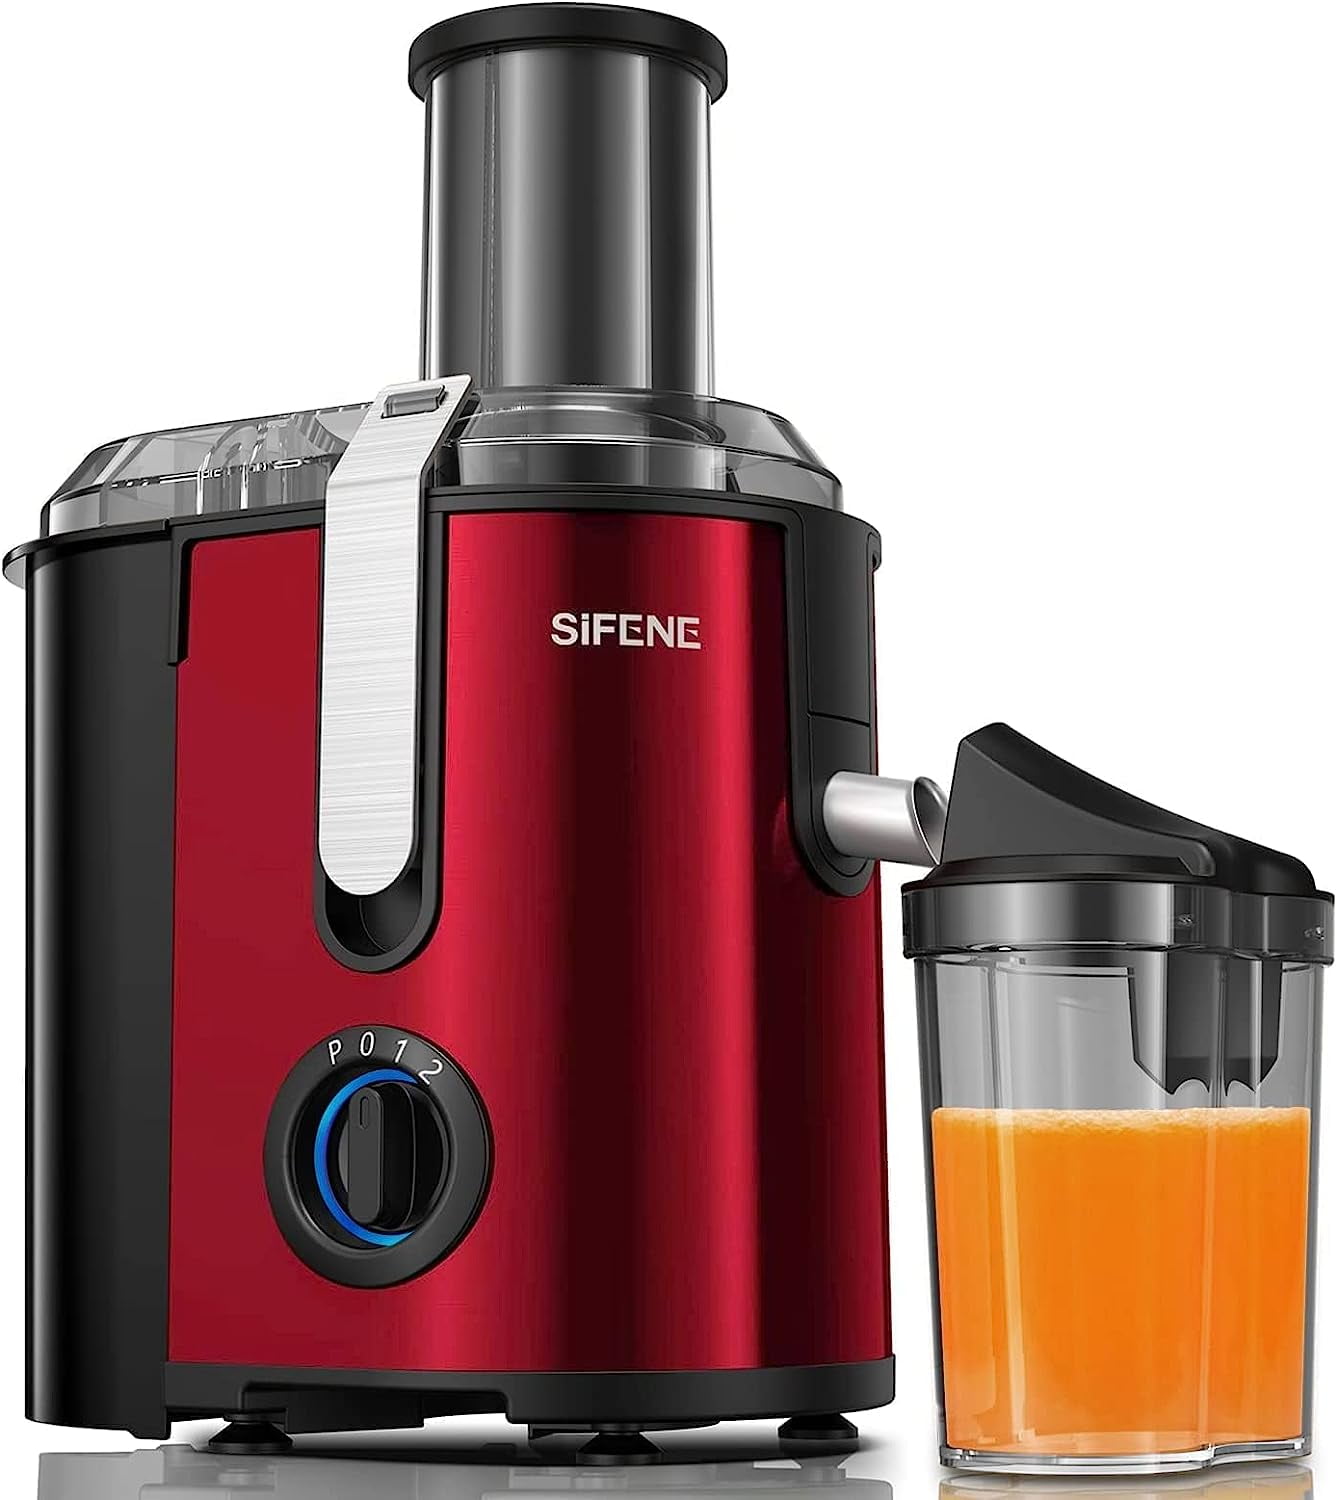 SiFENE Juicer Machine, 1000W(Peak) Centrifugal Juicer with 3.2 Big Mouth  for Whole Fruits and Veggies, Juice Extractor Maker with 3 Speeds Settings, Easy  to Clean, BPA Free (Red) 